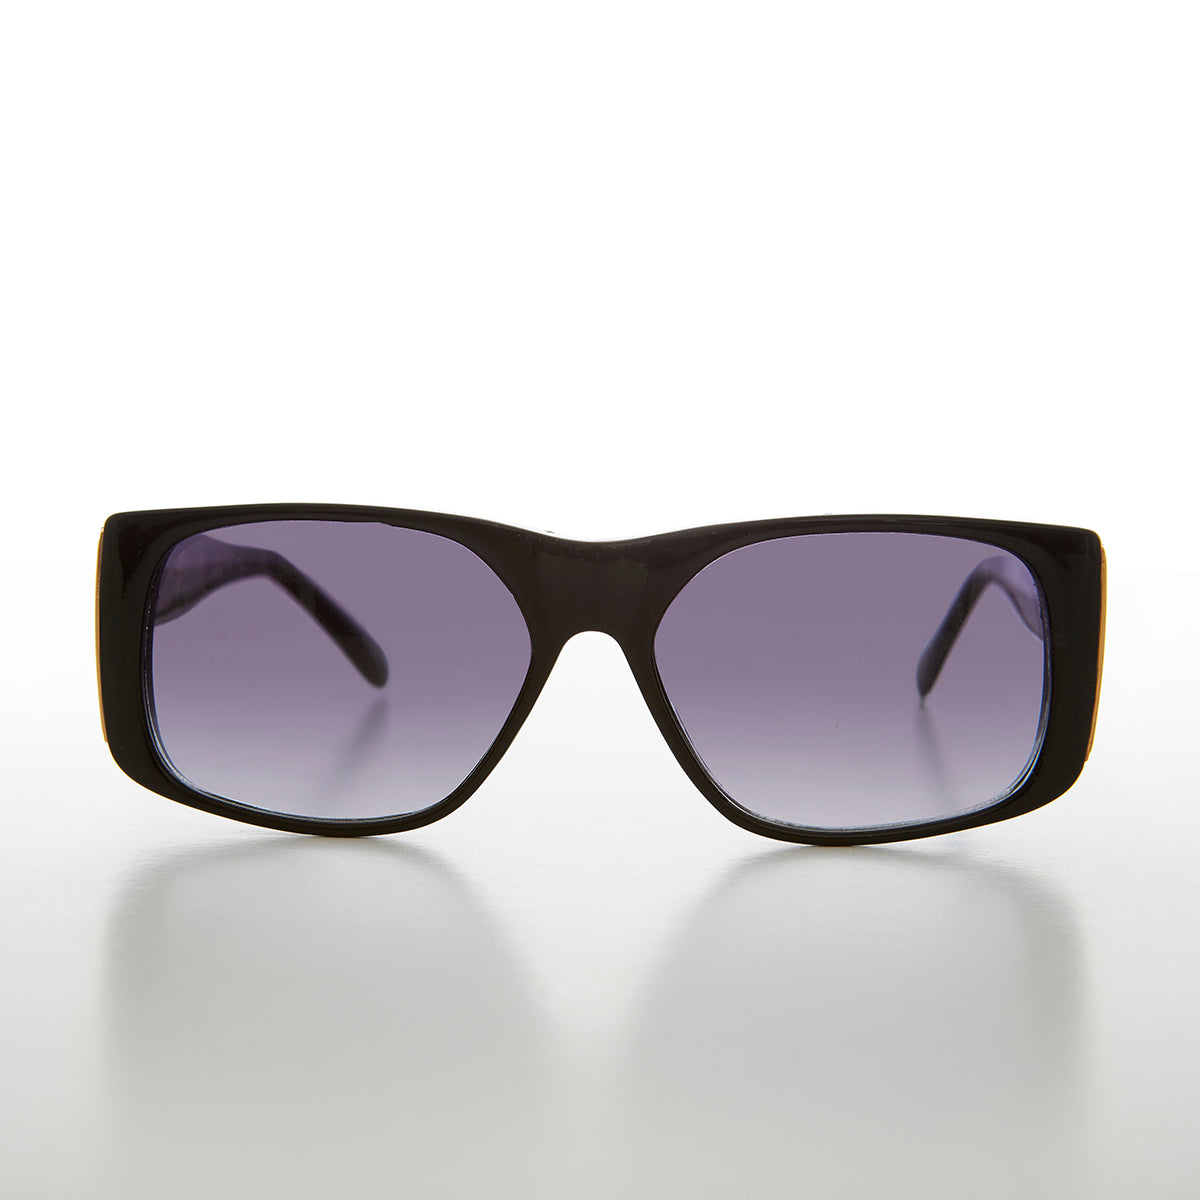 Square Block Sunglass with Gold Rim Accents 80s